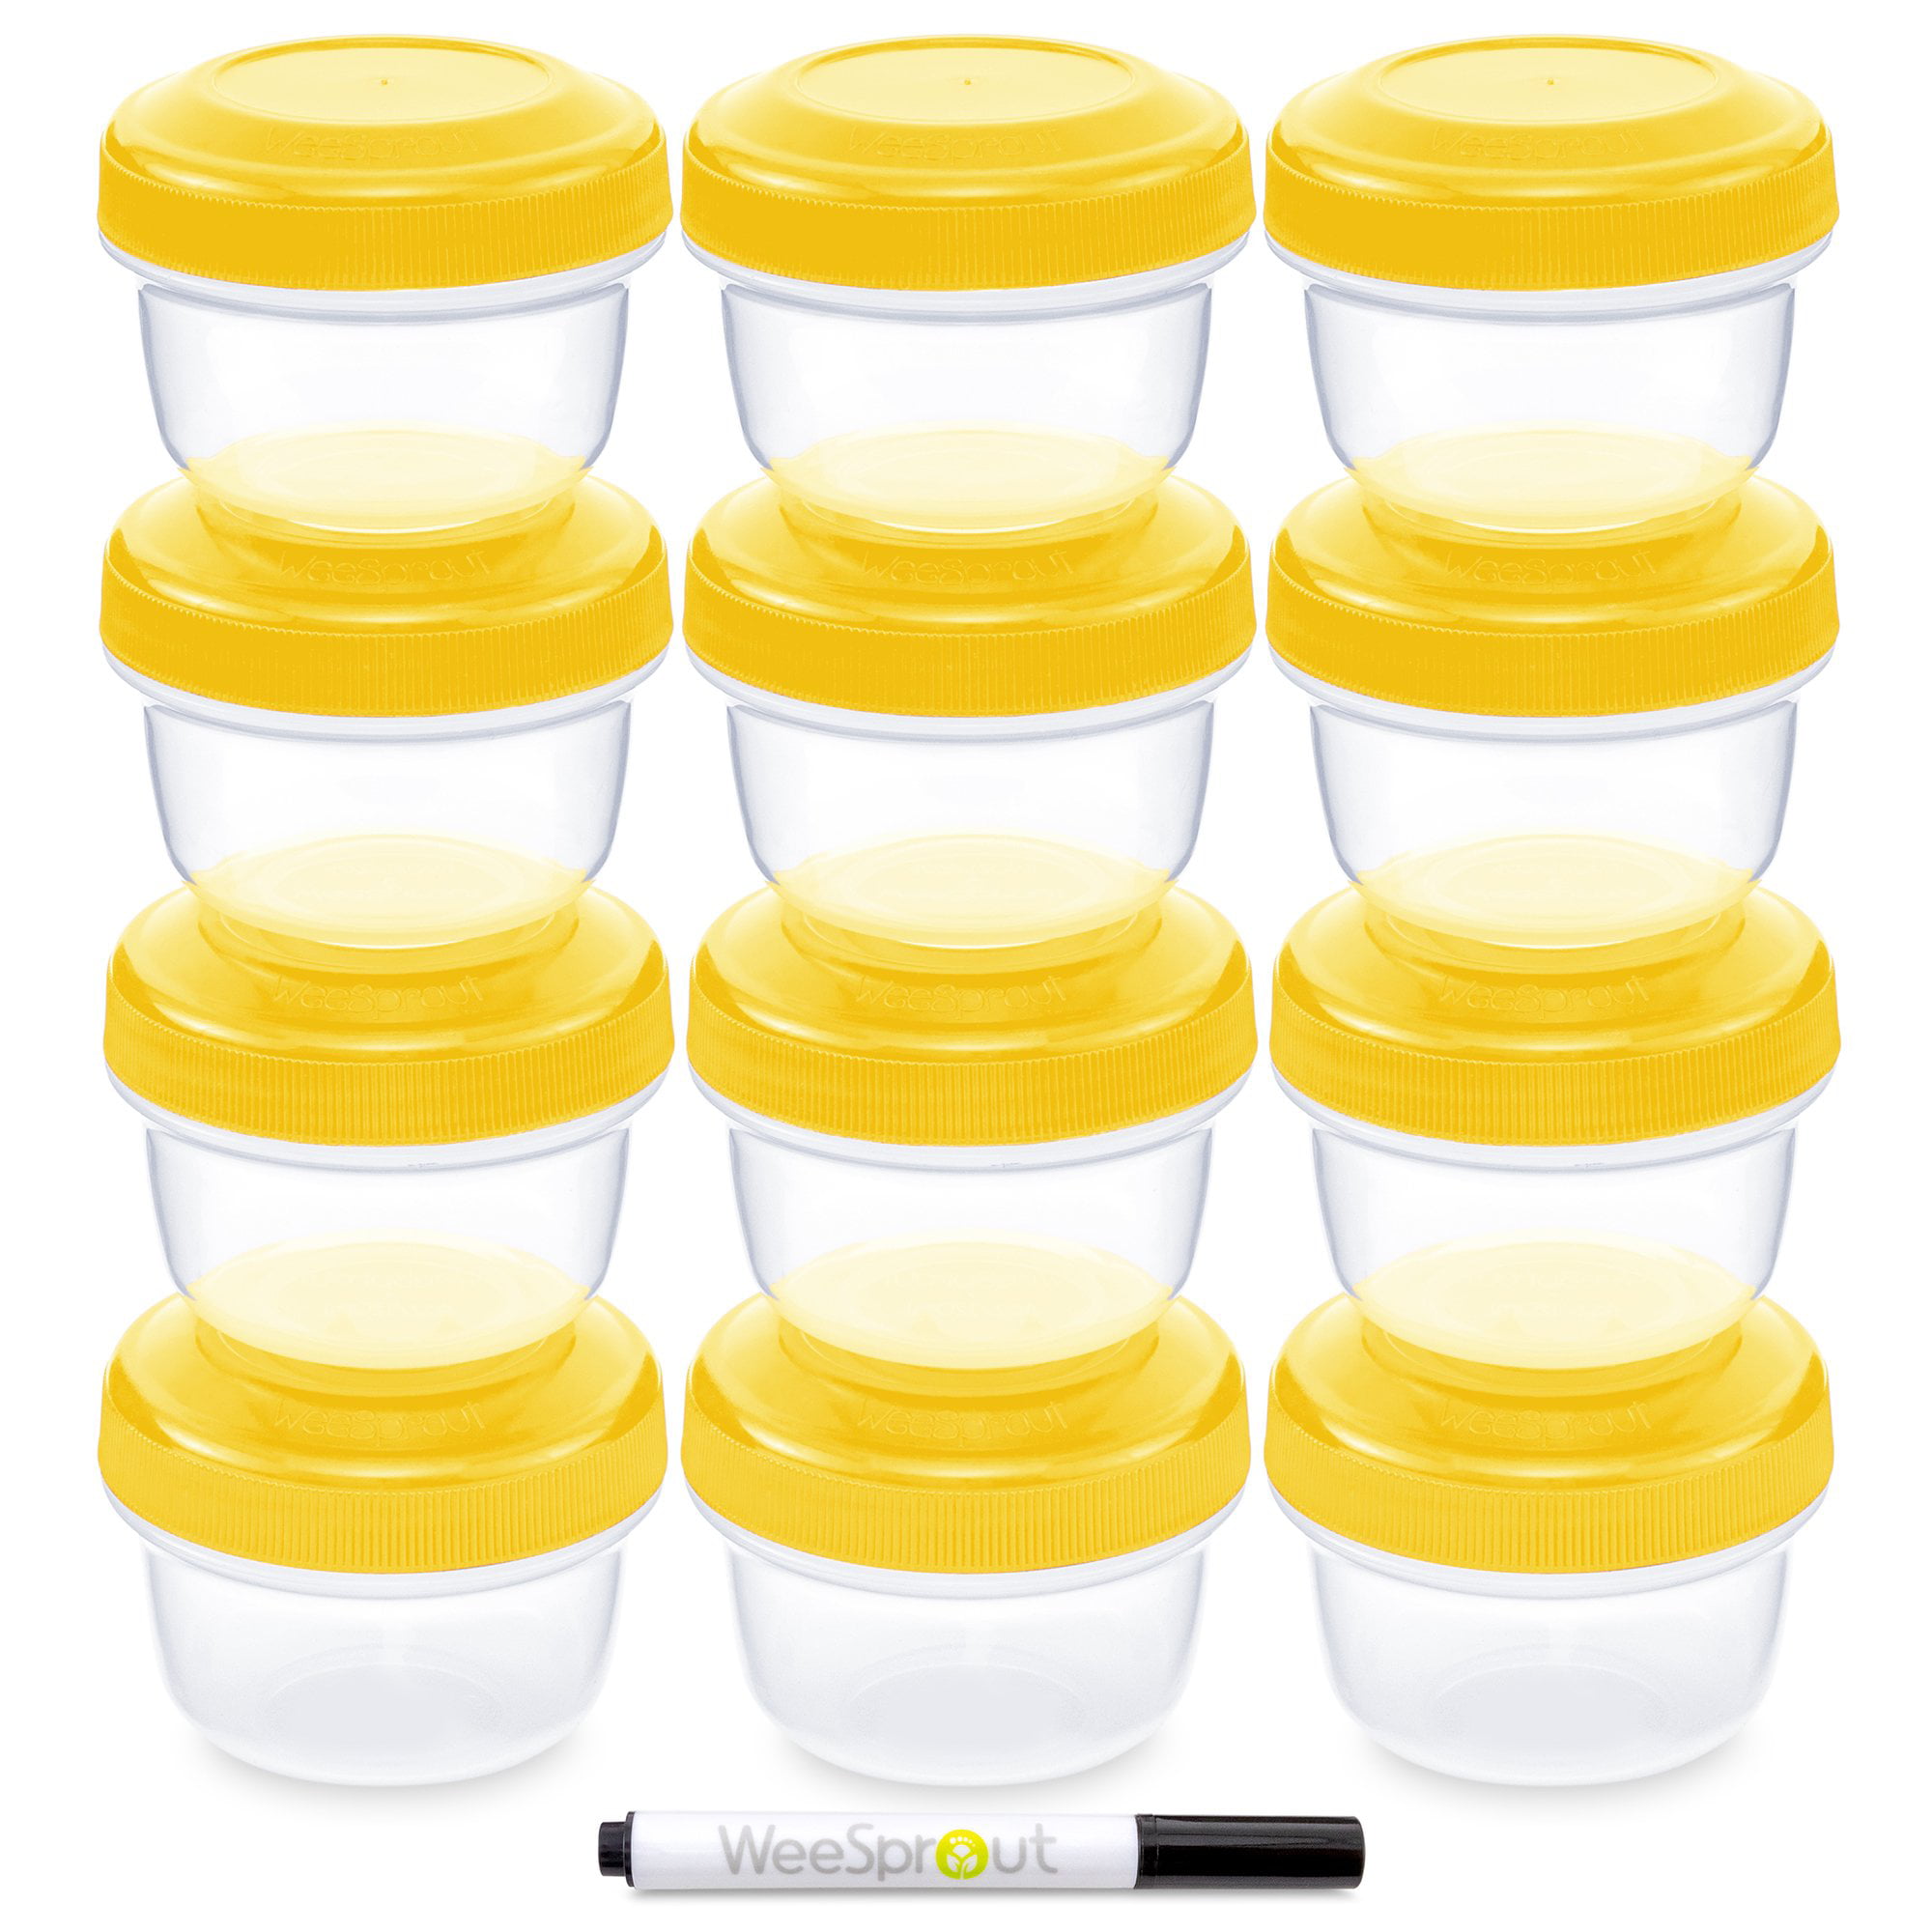 Get Lock & Lock Baby Food Container, Sealed Storage Box Yellow Delivered